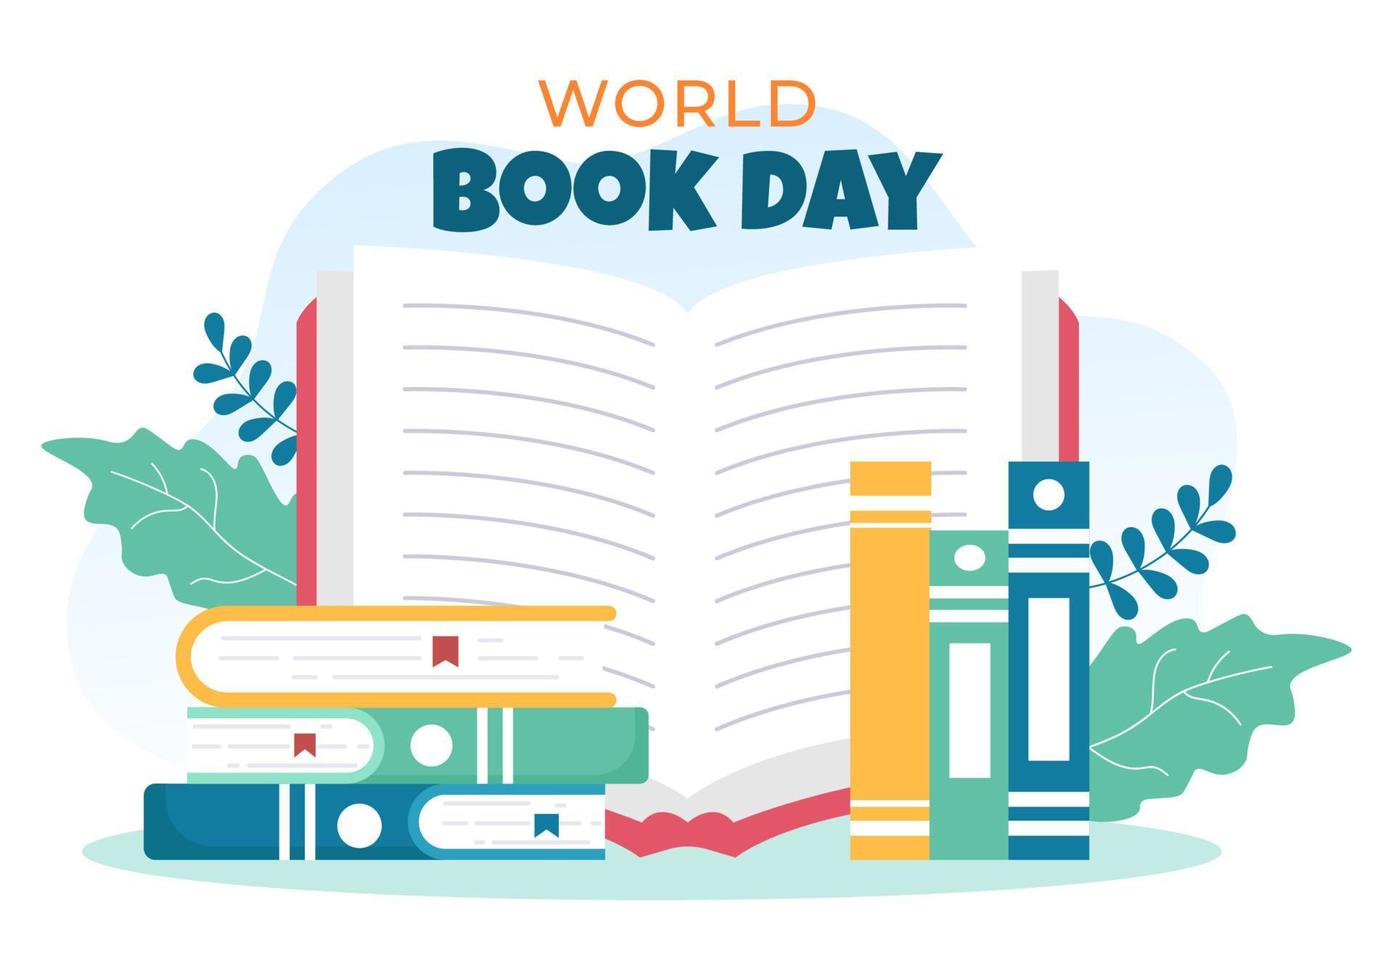 World Book Day Flat Cartoon Background Illustration. Stack of Books to Reading, Increase Insight and Knowledge Suitable for Wallpaper or Poster vector